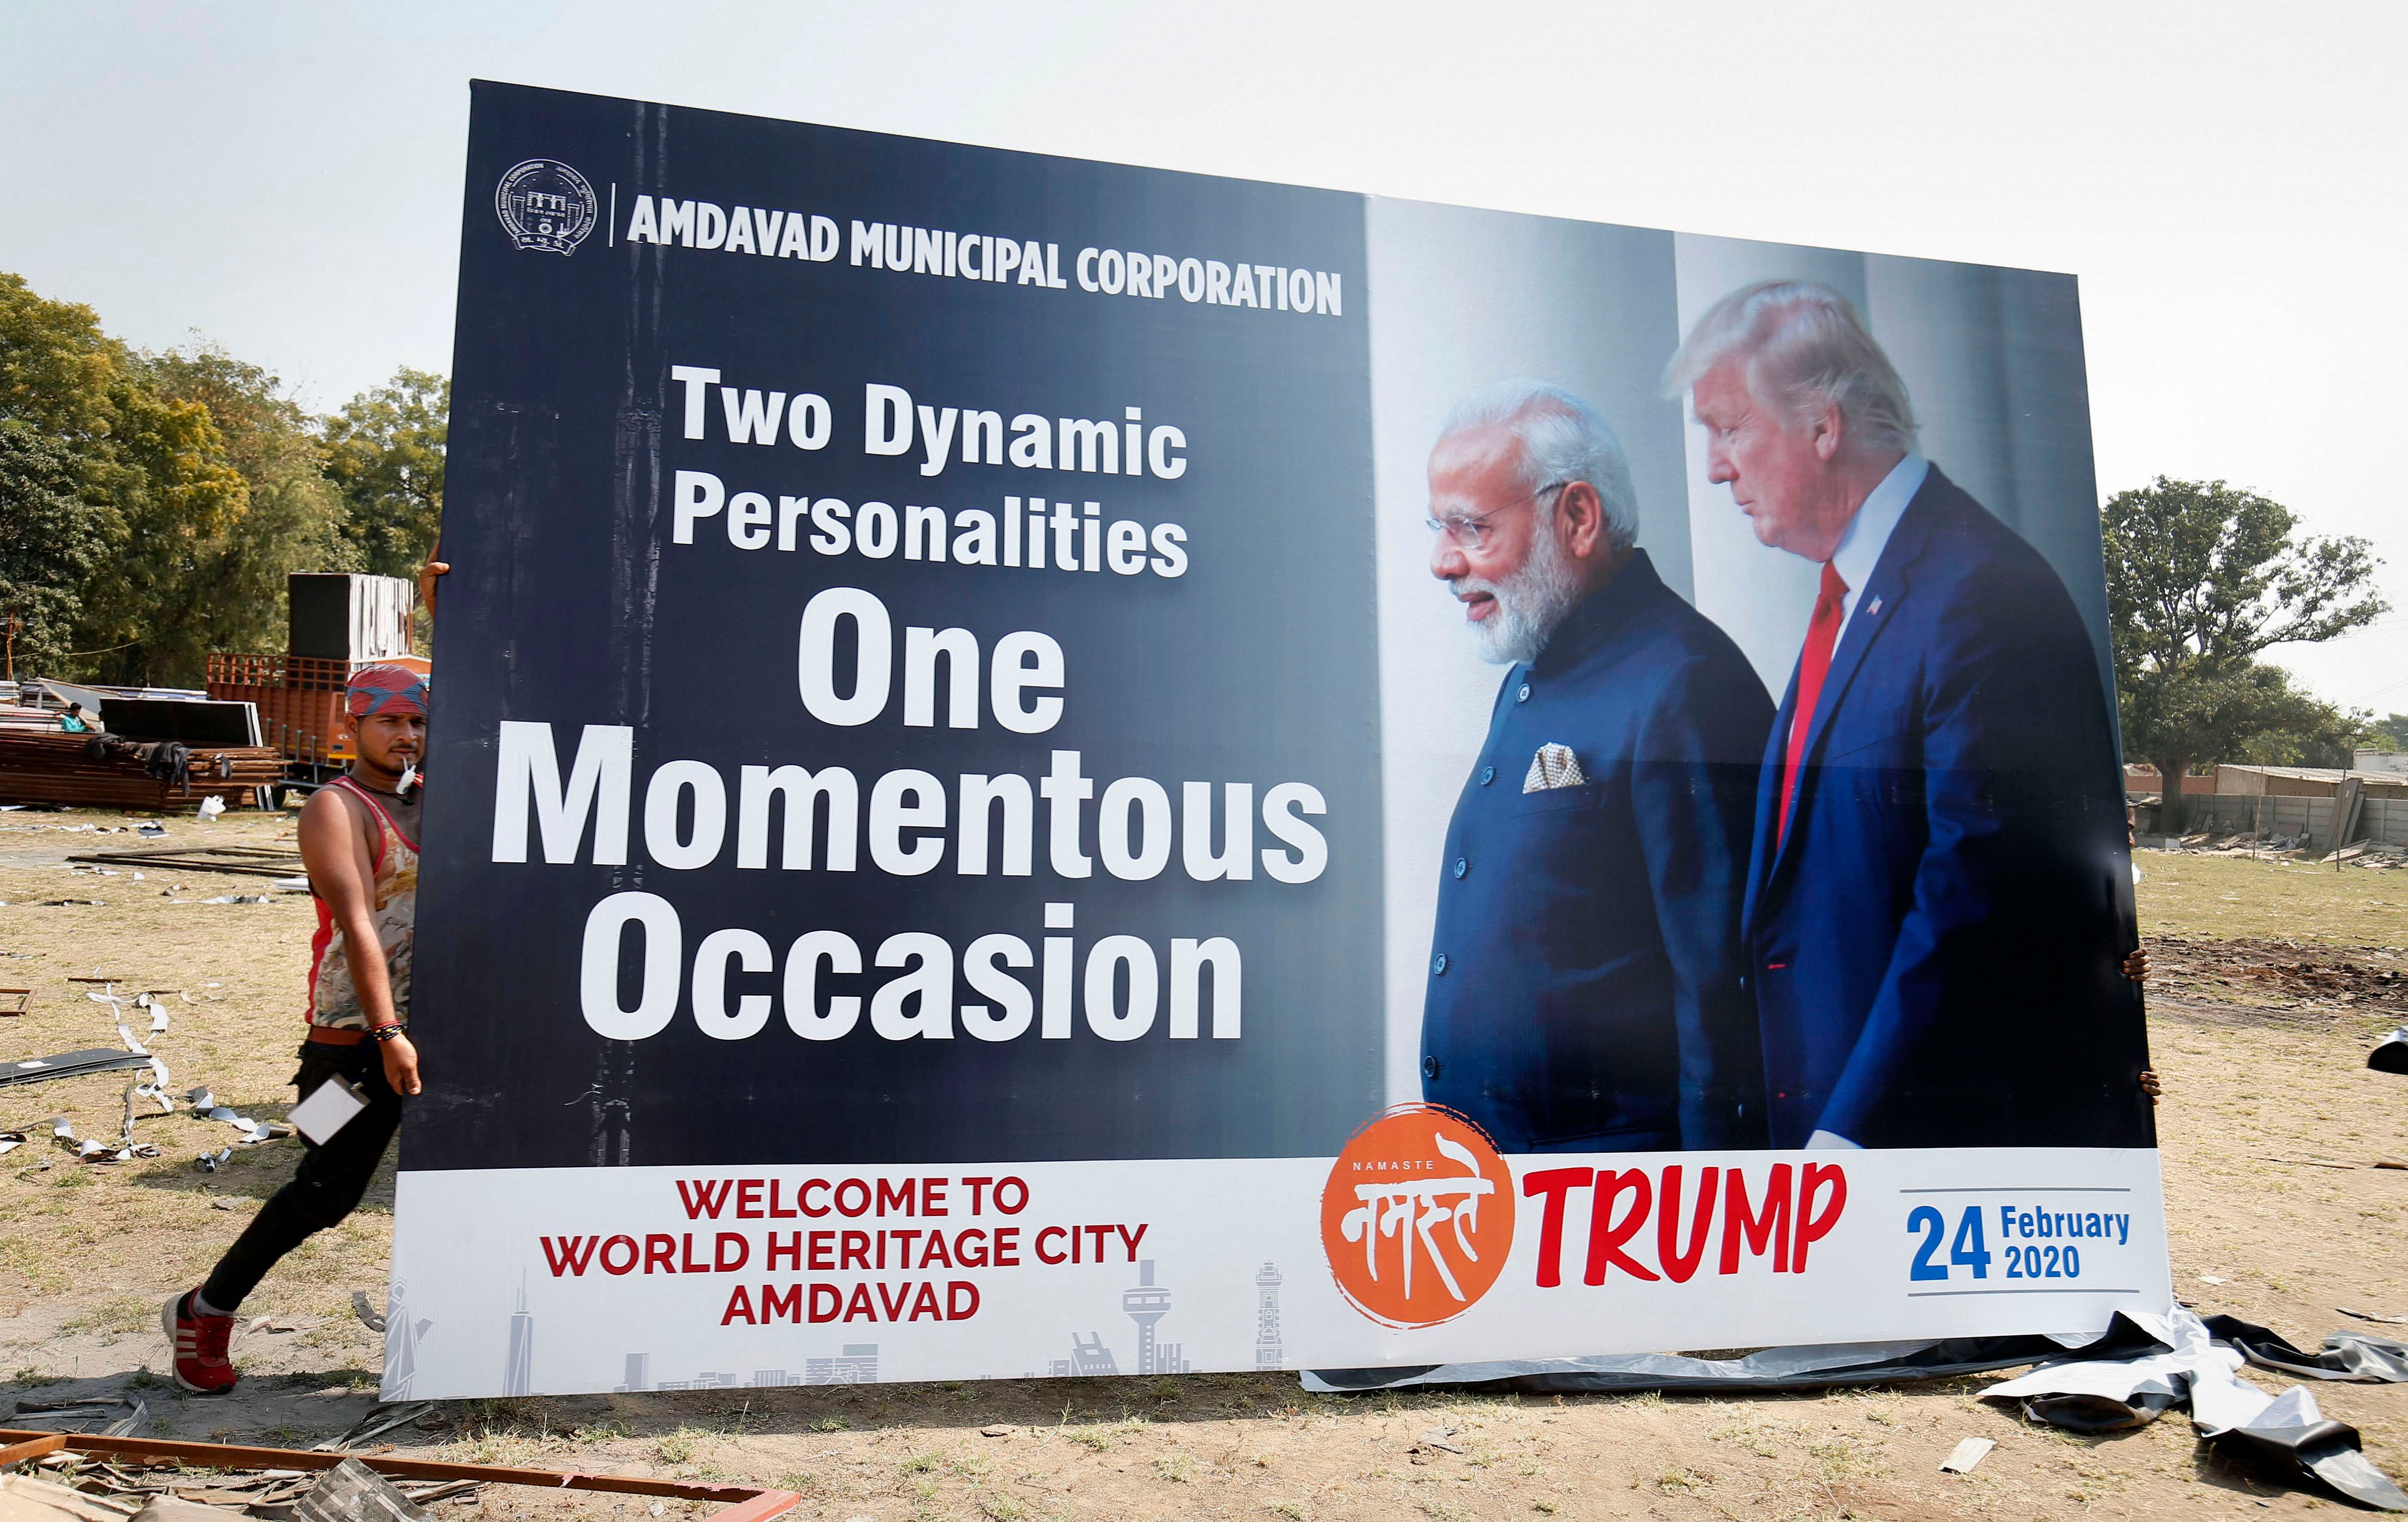 Workers carry a hoarding with pictures of the U.S. President Donald Trump and India's Prime Minister Narendra Modi as preparations are underway for Trump's forthcoming 'Namaste Trump' event, in Ahmedabad. (Credit: PTI Photo)